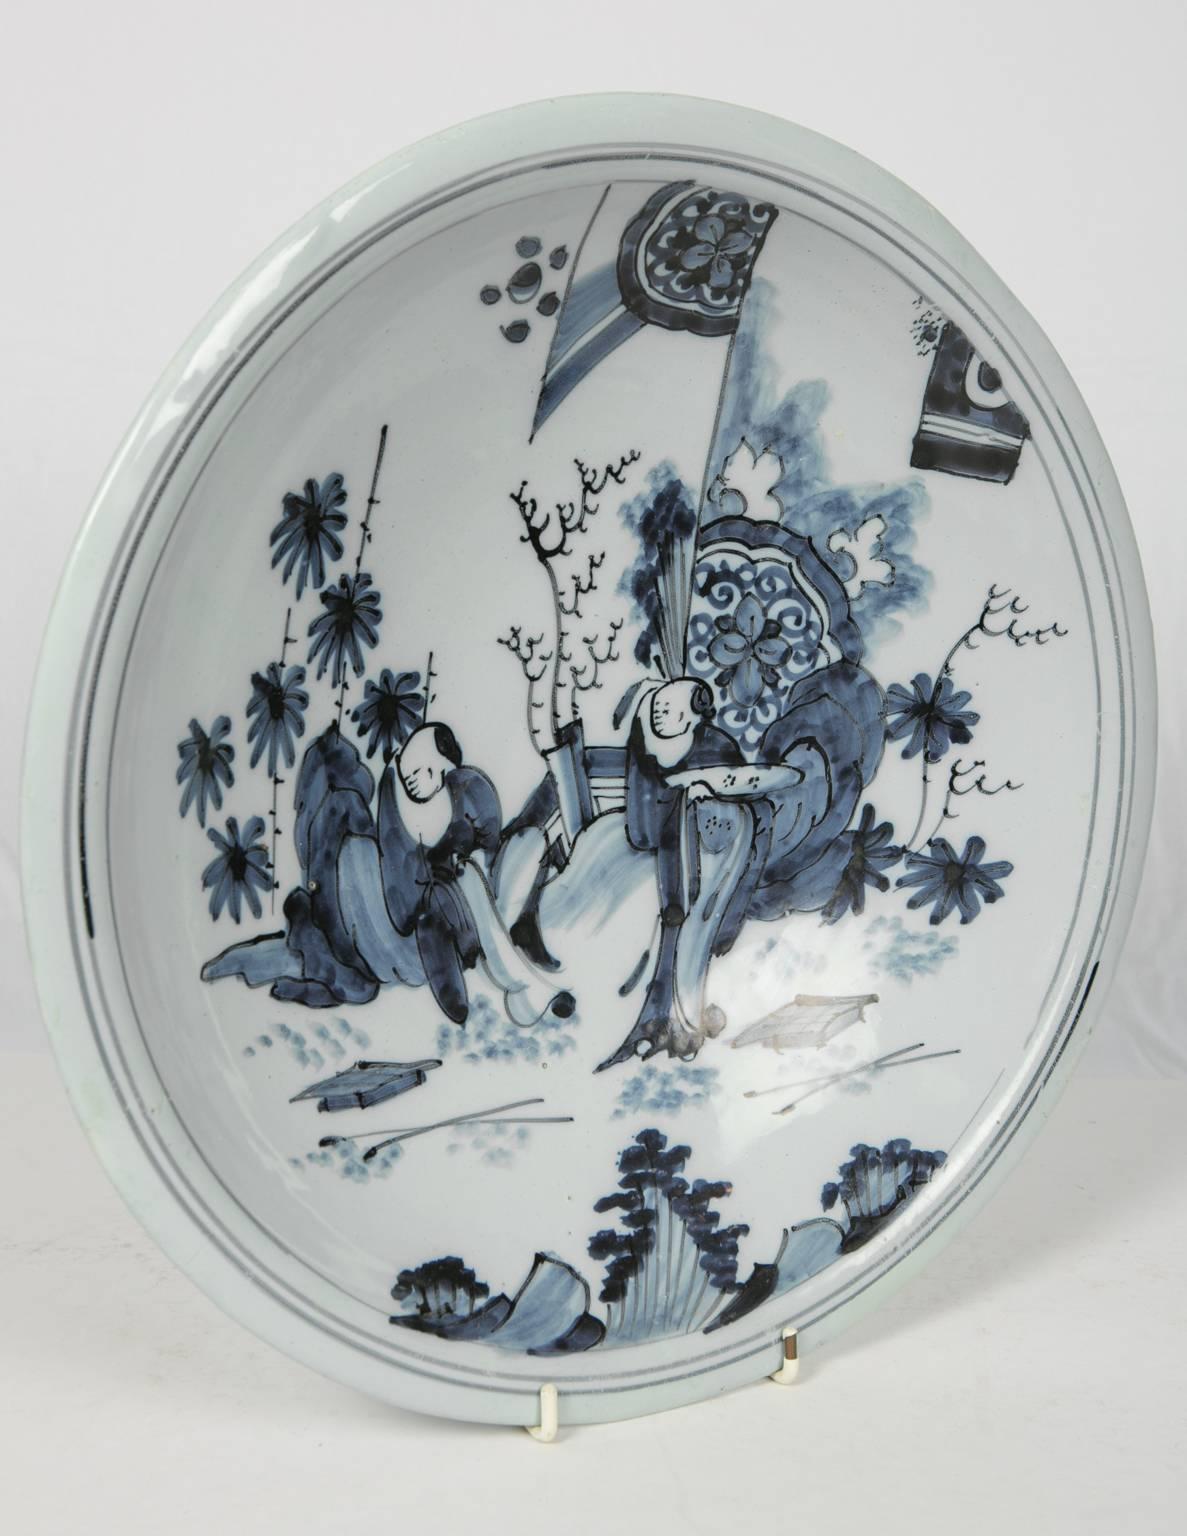 Blue and White Delft Charger with Chinese Inspired Scene Made circa 1640-1650 (Niederländisch)